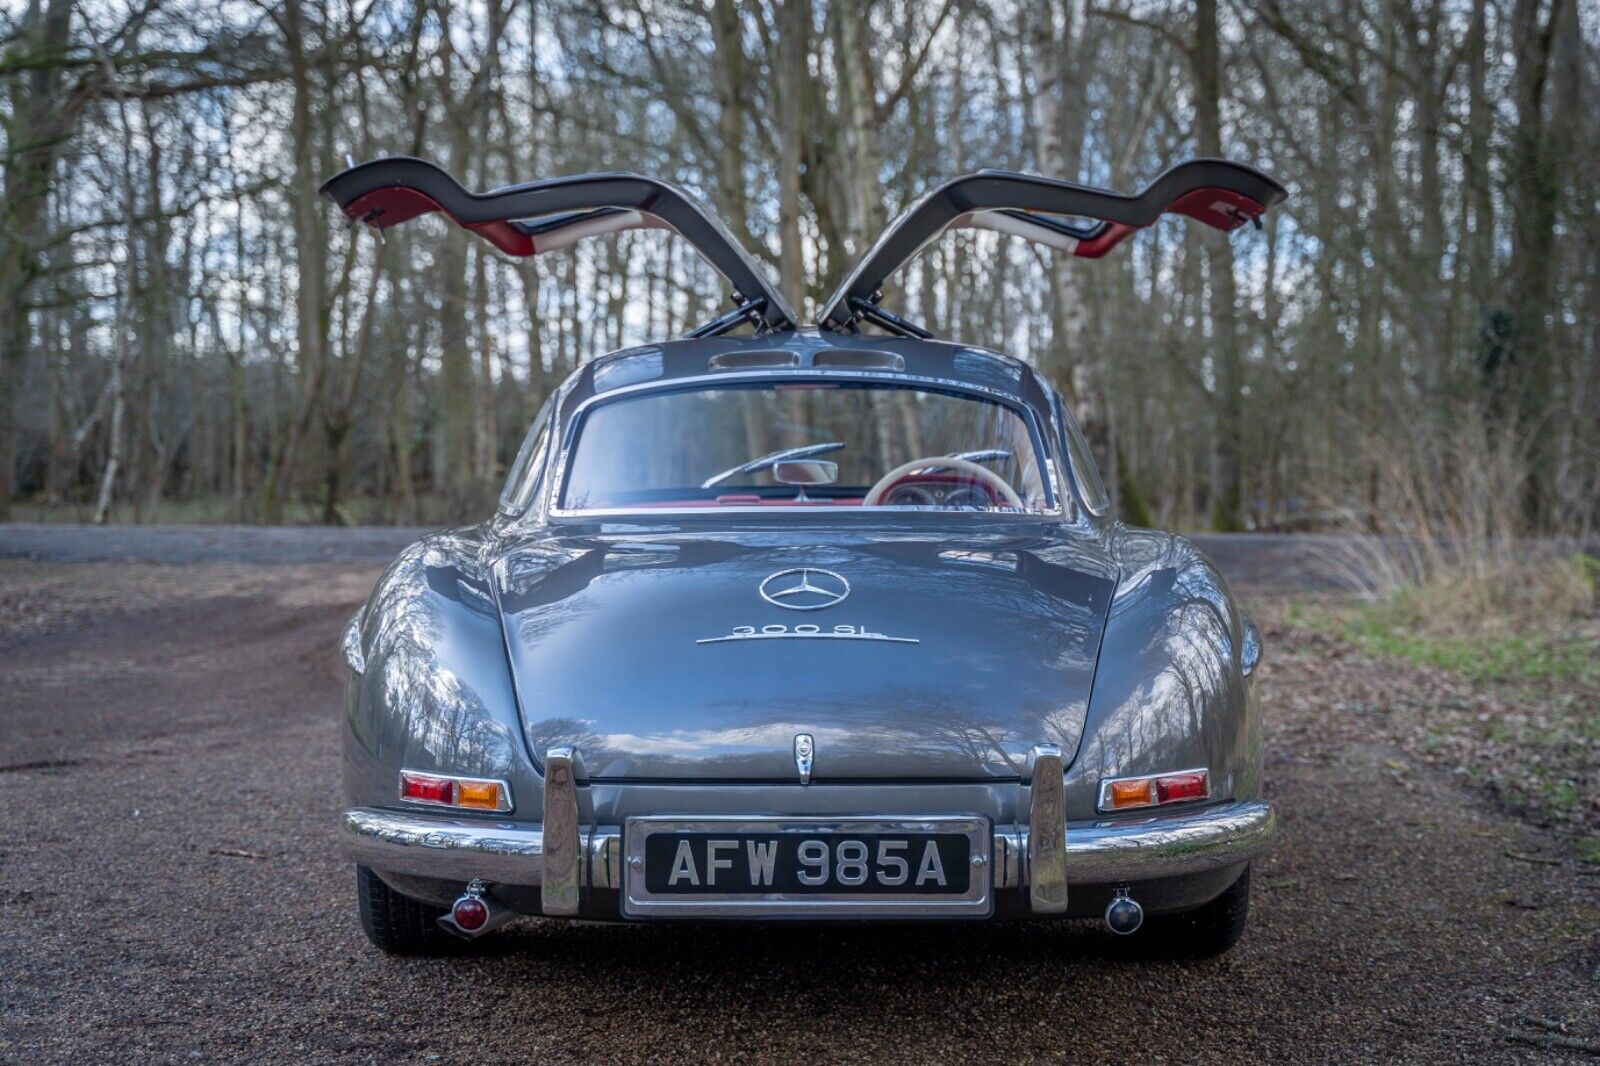 Would you pay £200,000 for this uncanny 'Gullwing' replica based on an SLK?